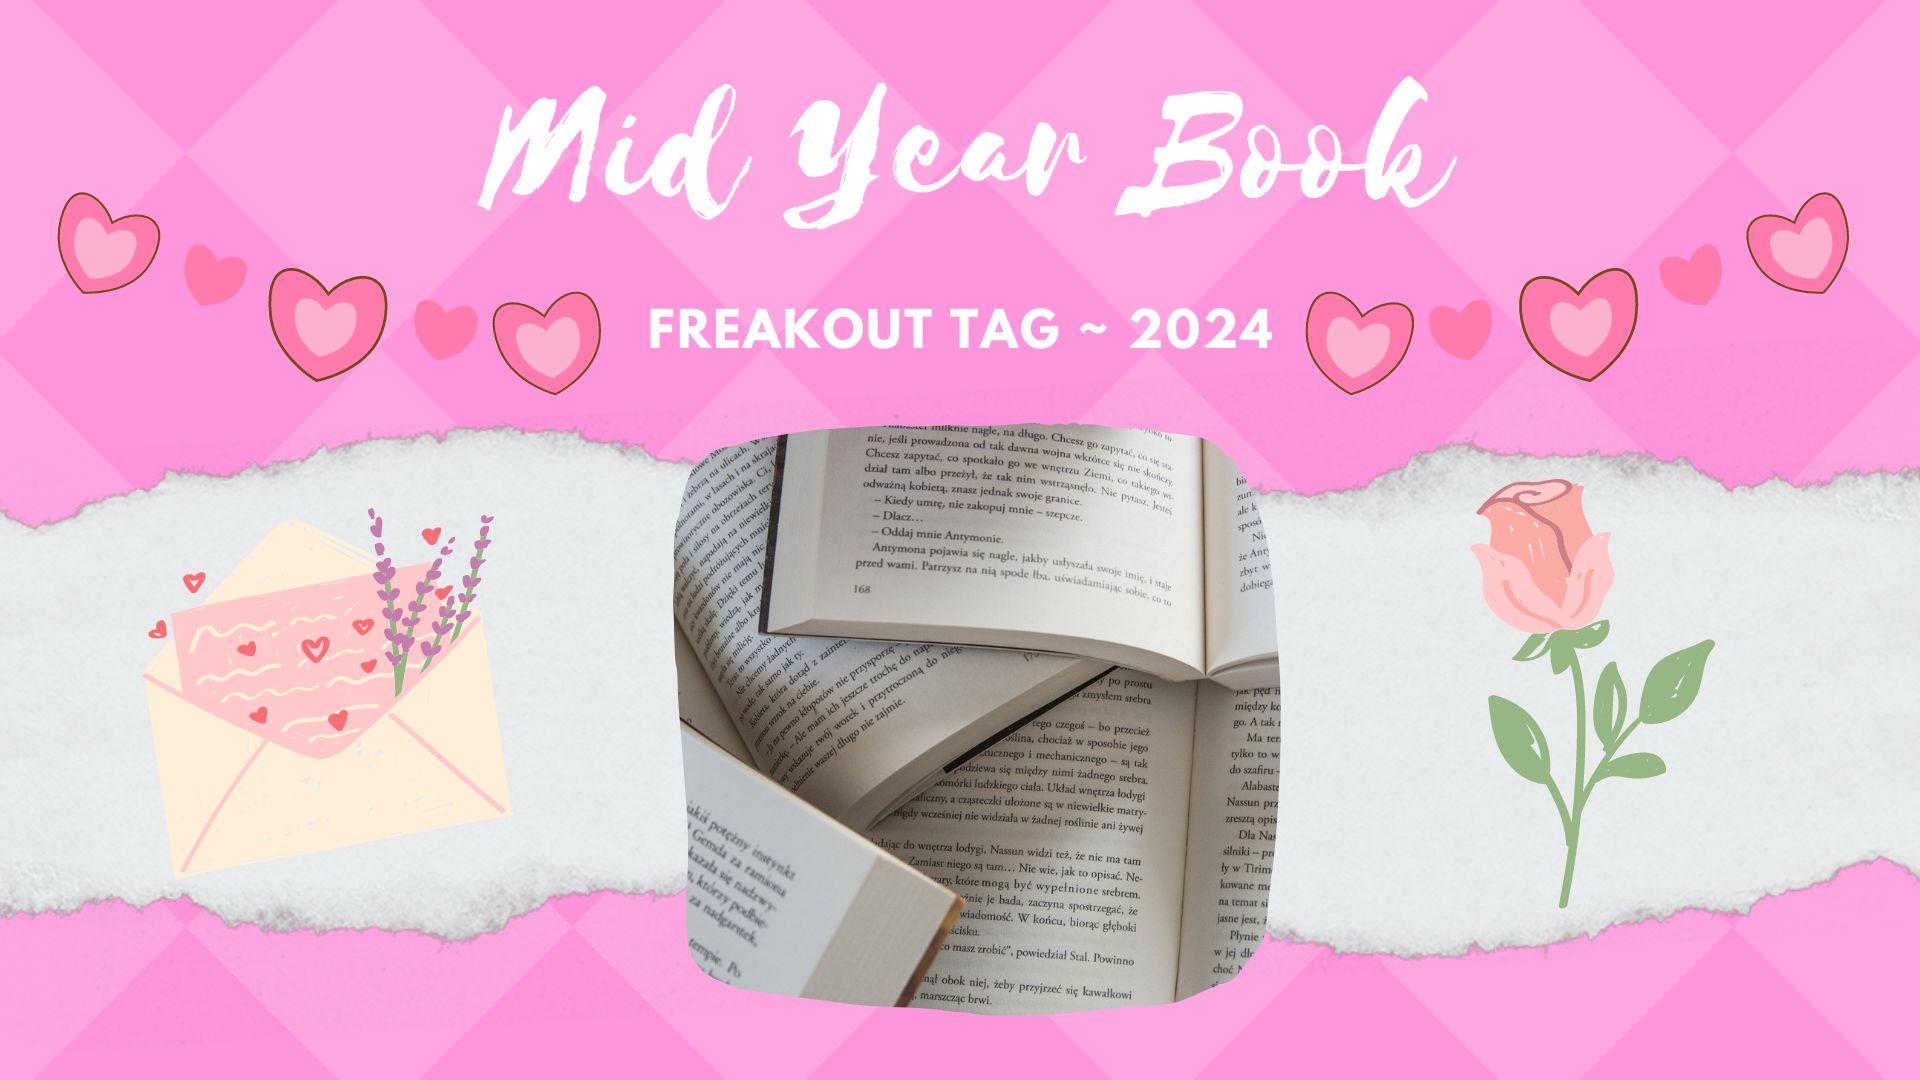 Mid Year Book Freakout Tag 2024